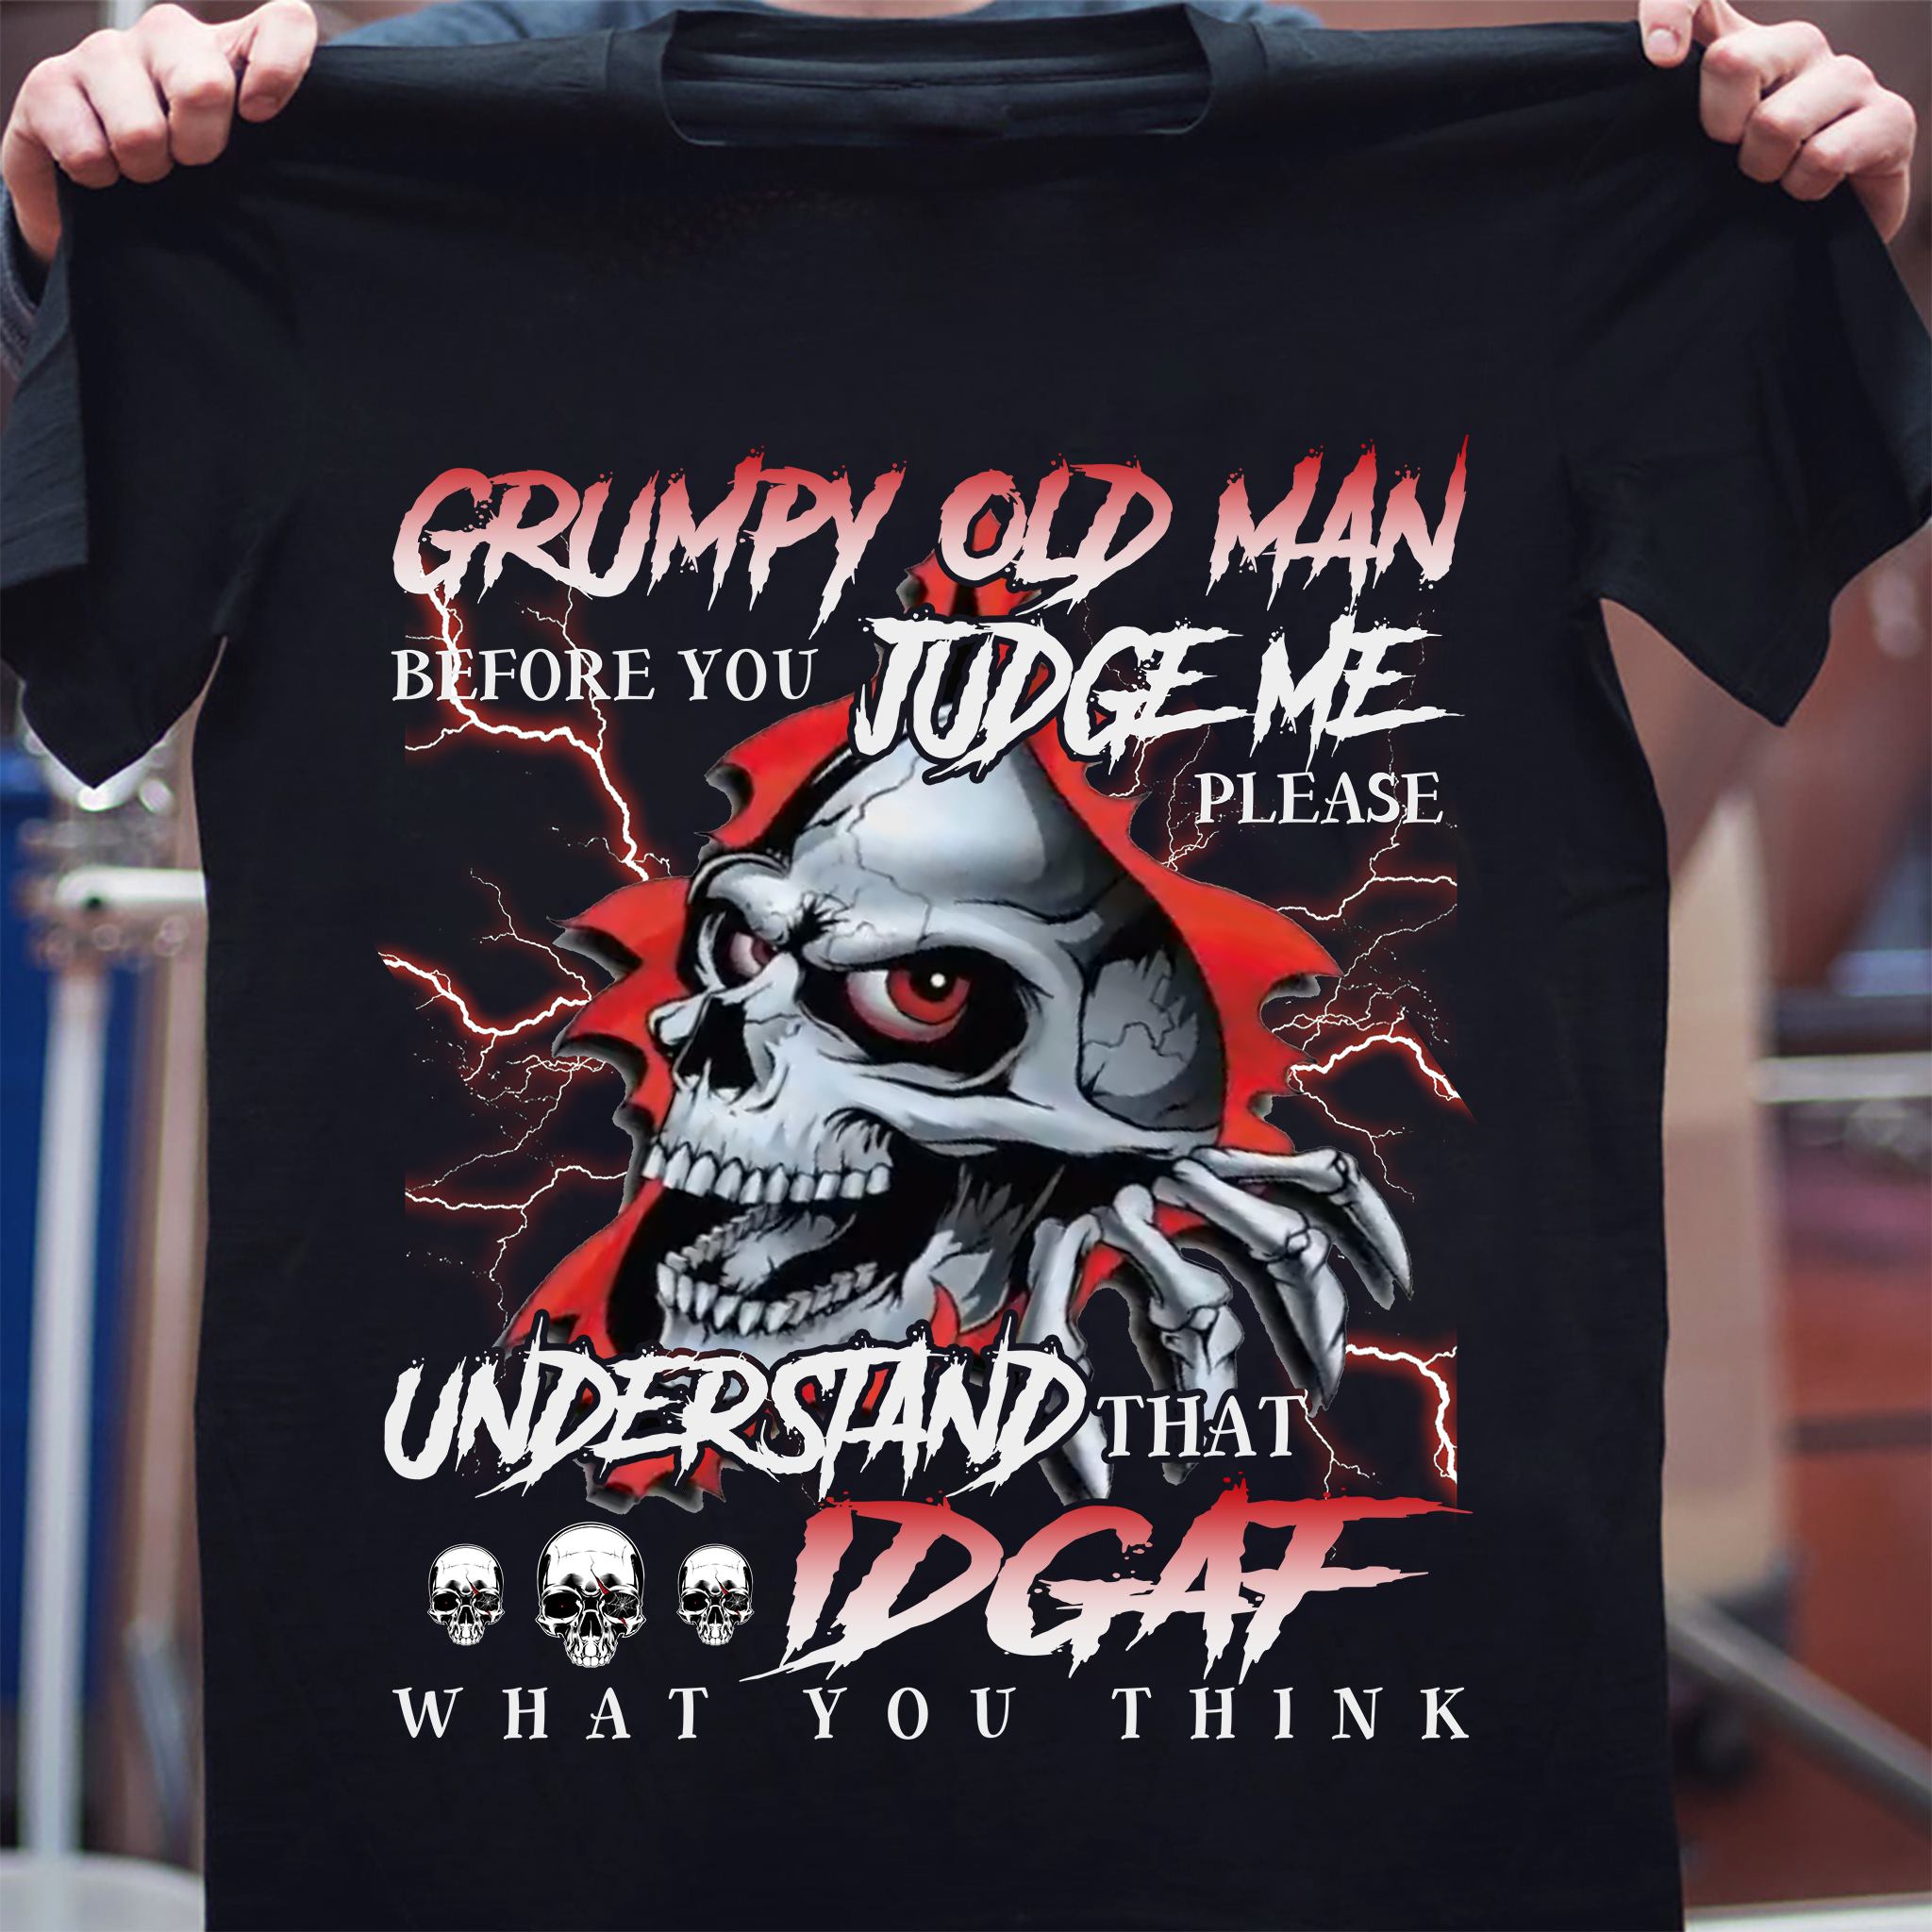 Grumpy old man before you judge me please understand that IDGAF what you think - Evil